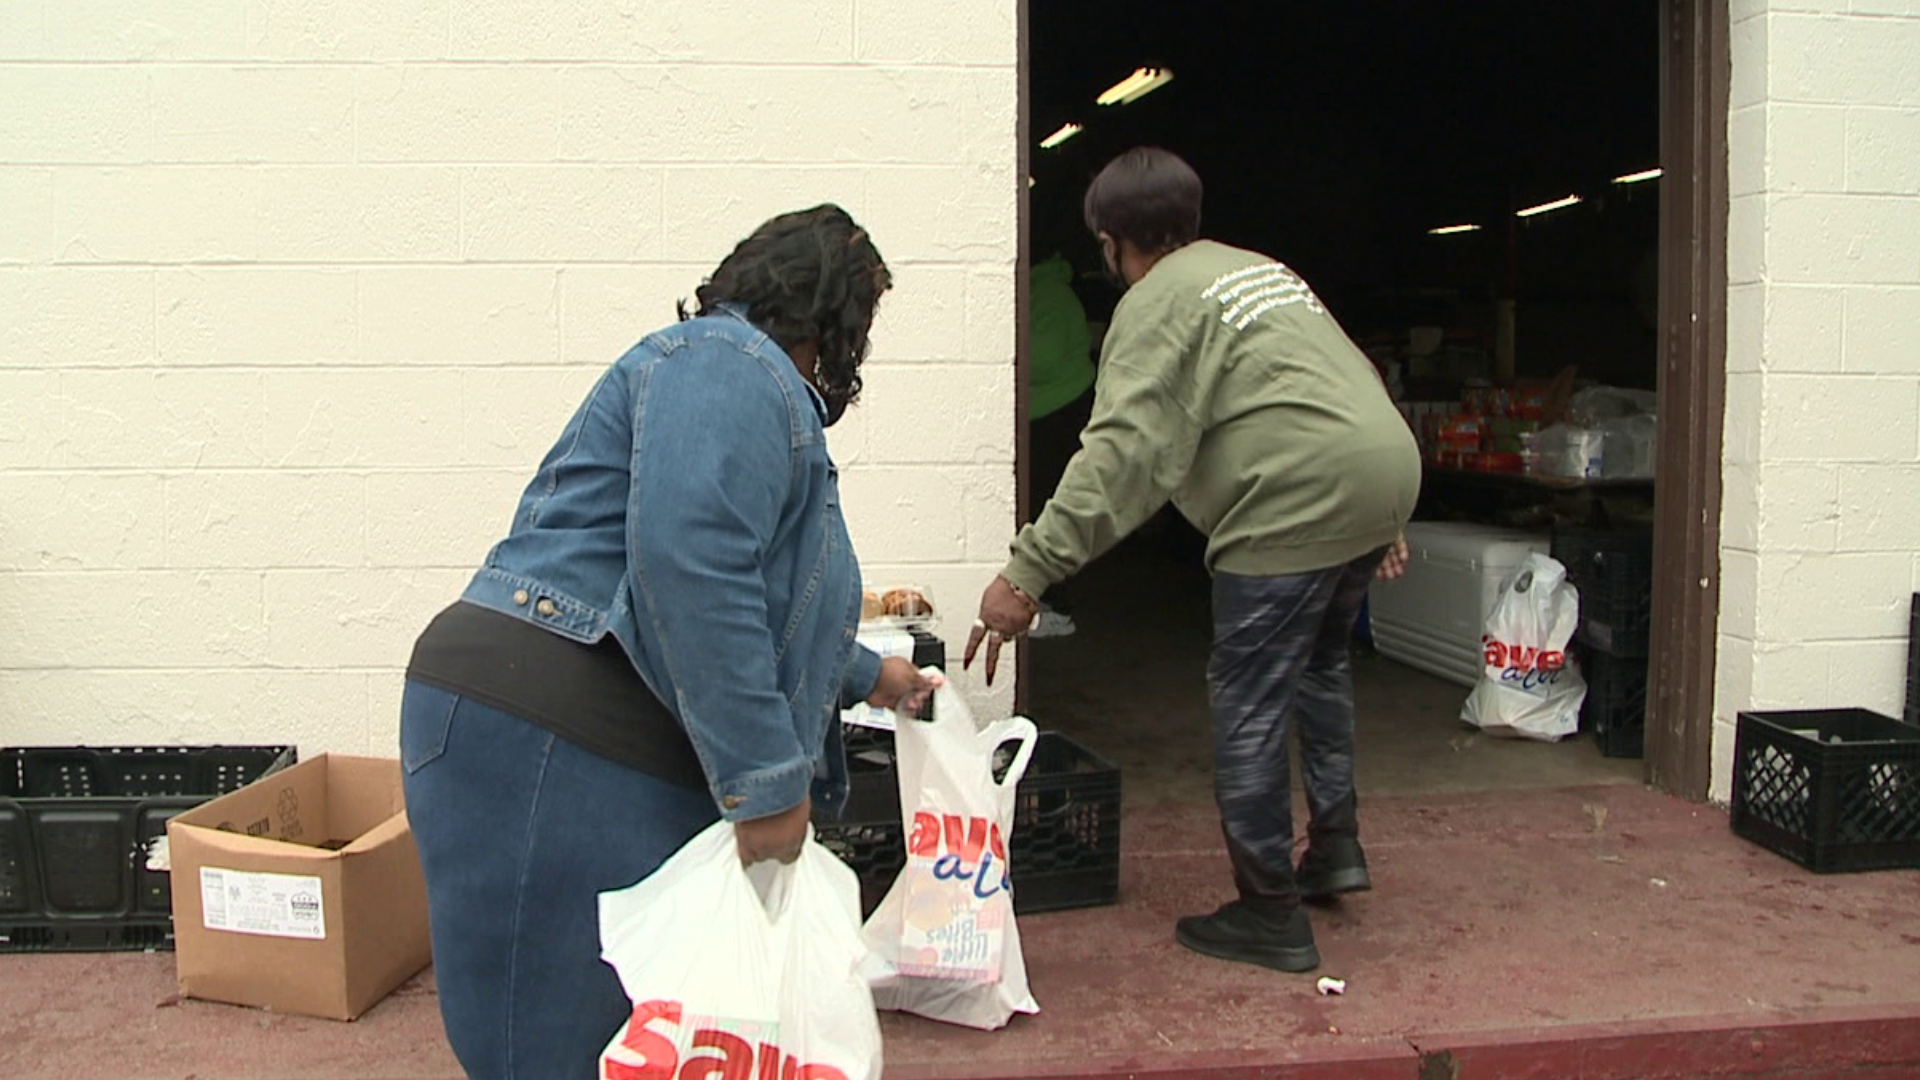 Mt. Zion Baptist Church hosted a food giveaway for Thanksgiving for the community.